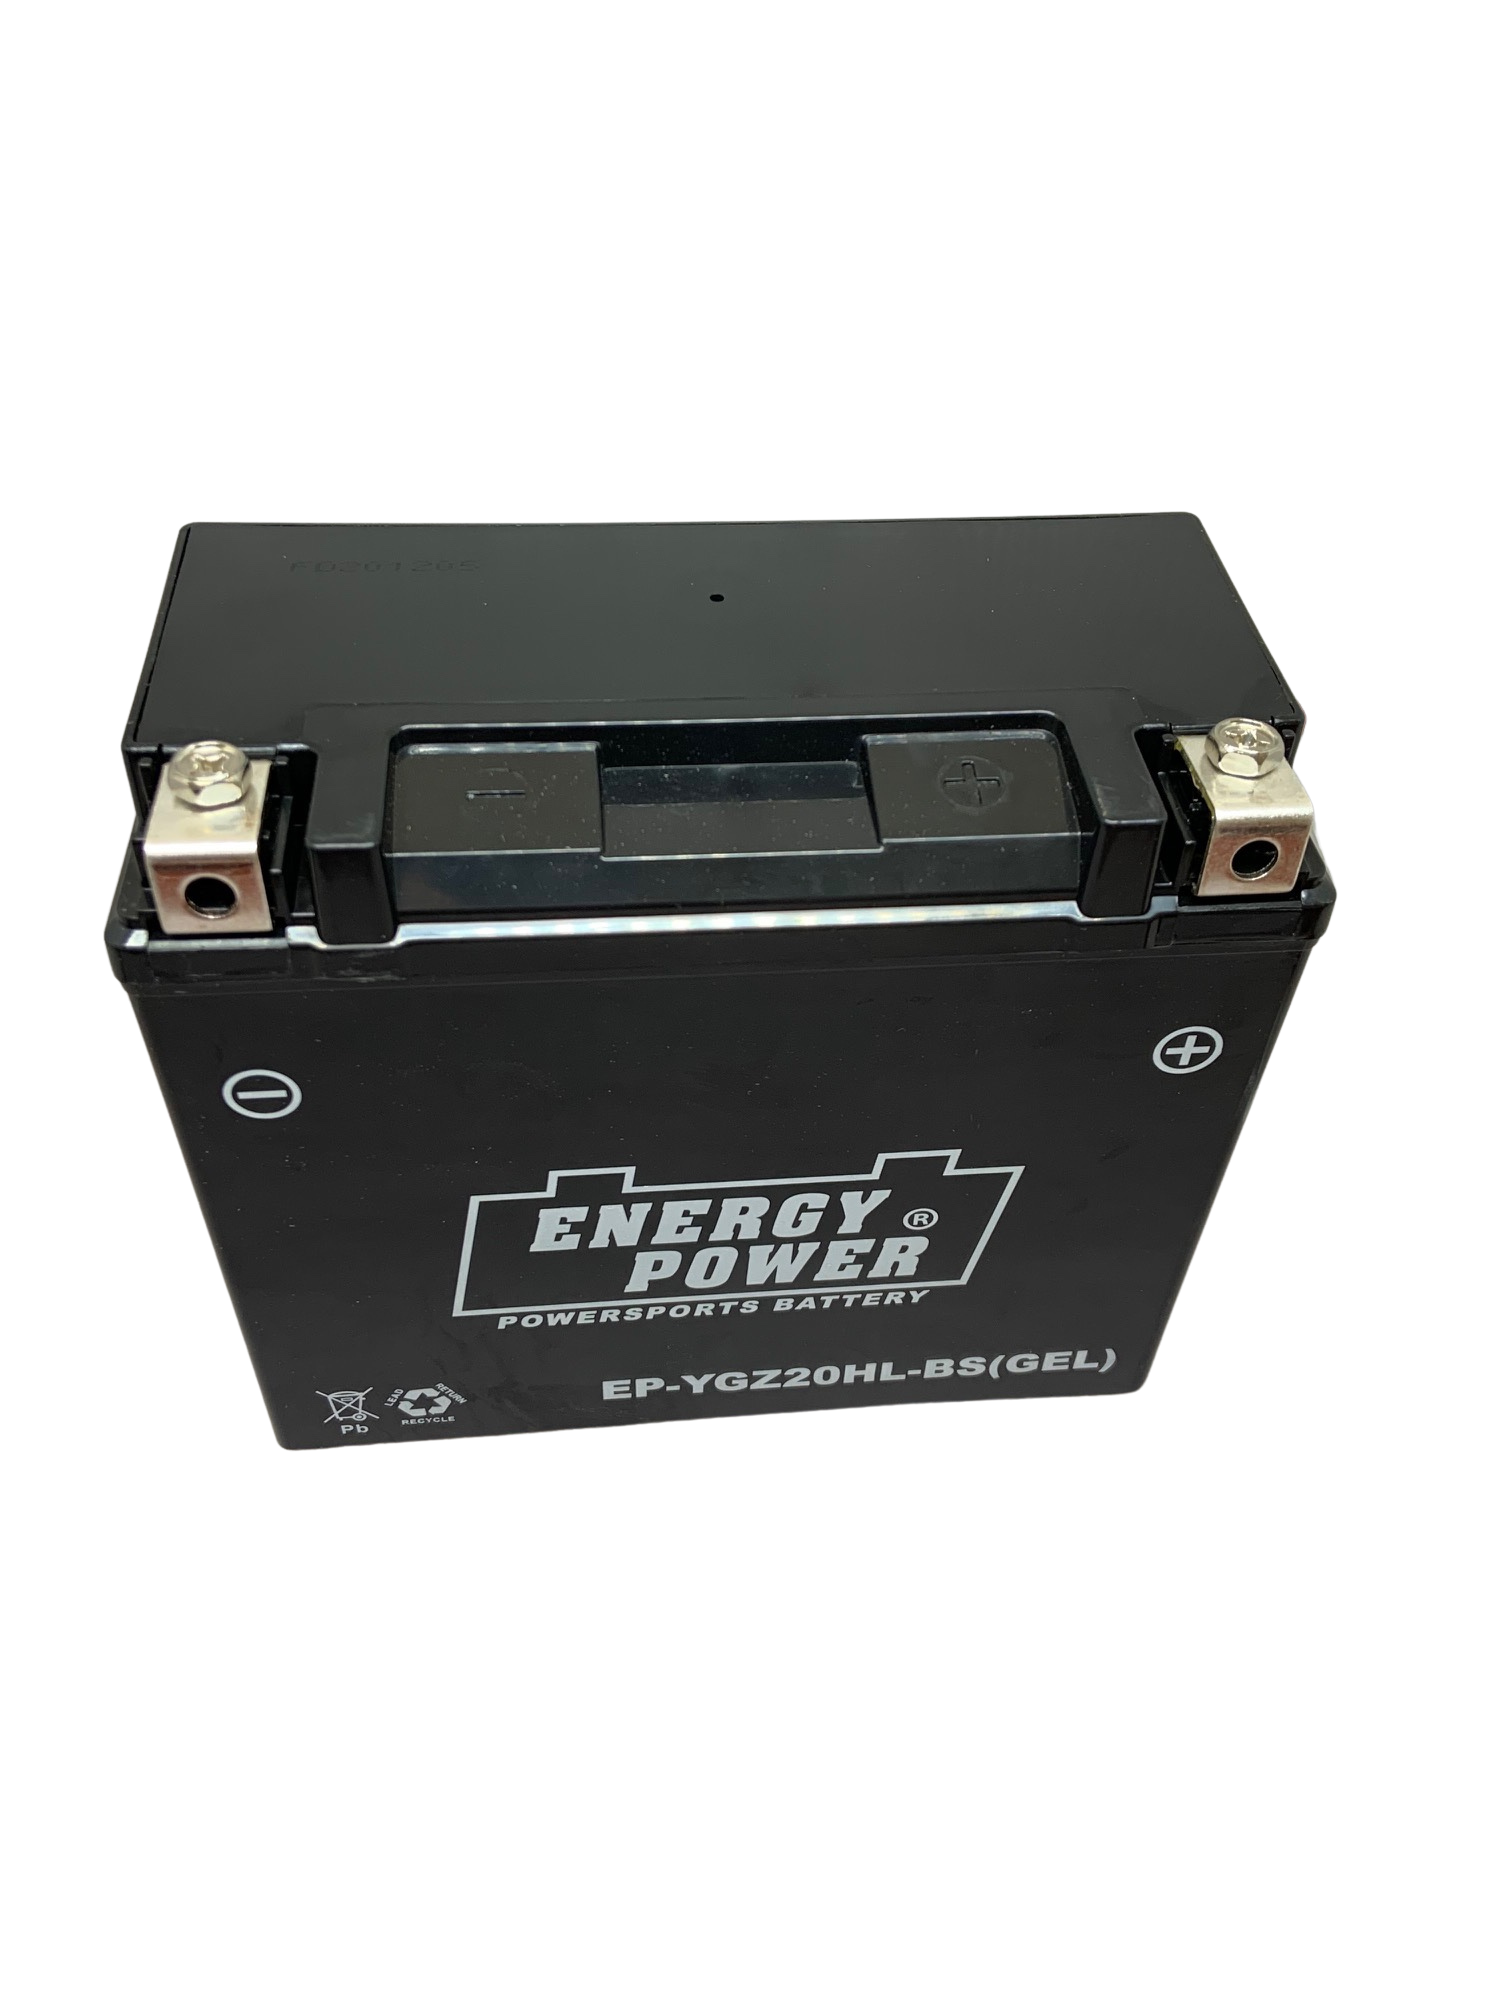 Would the EBG EP-YGZ20H-BS ep battery fit a 2012 Harley Davidson Electra Glide Ultra Classic?